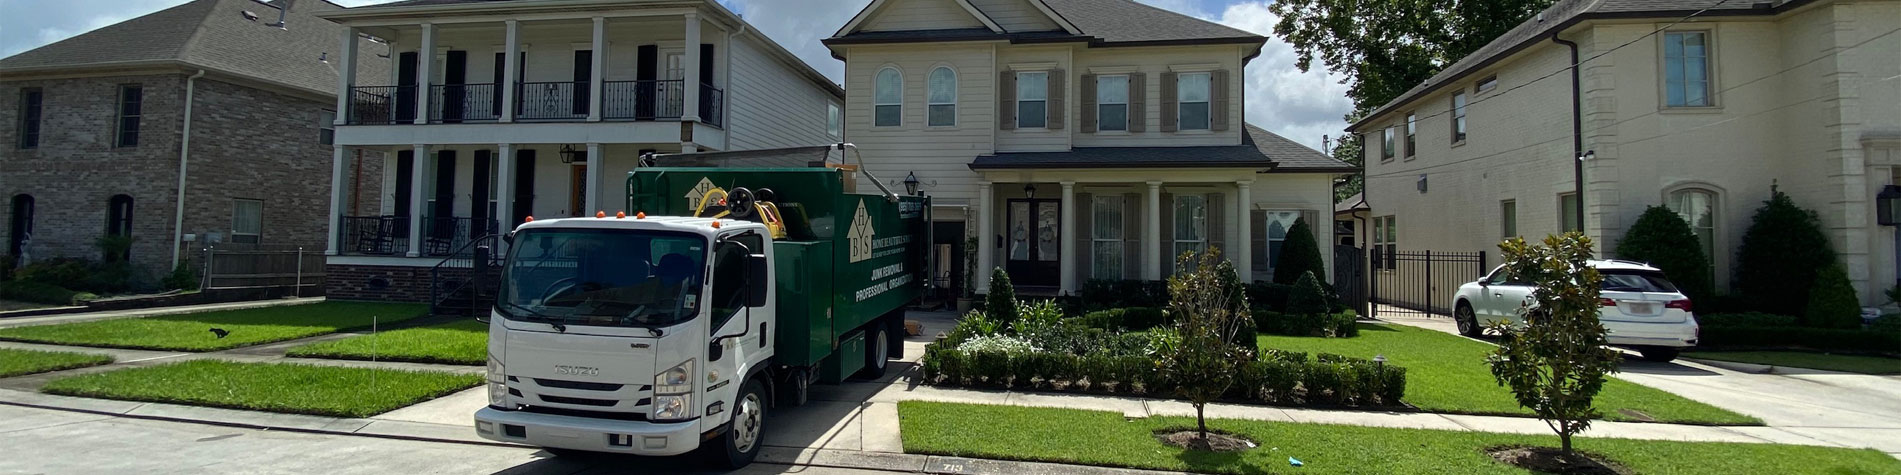 Junk Removal Truck in a Madisonville Neighborhood Completing Junk Removal Work